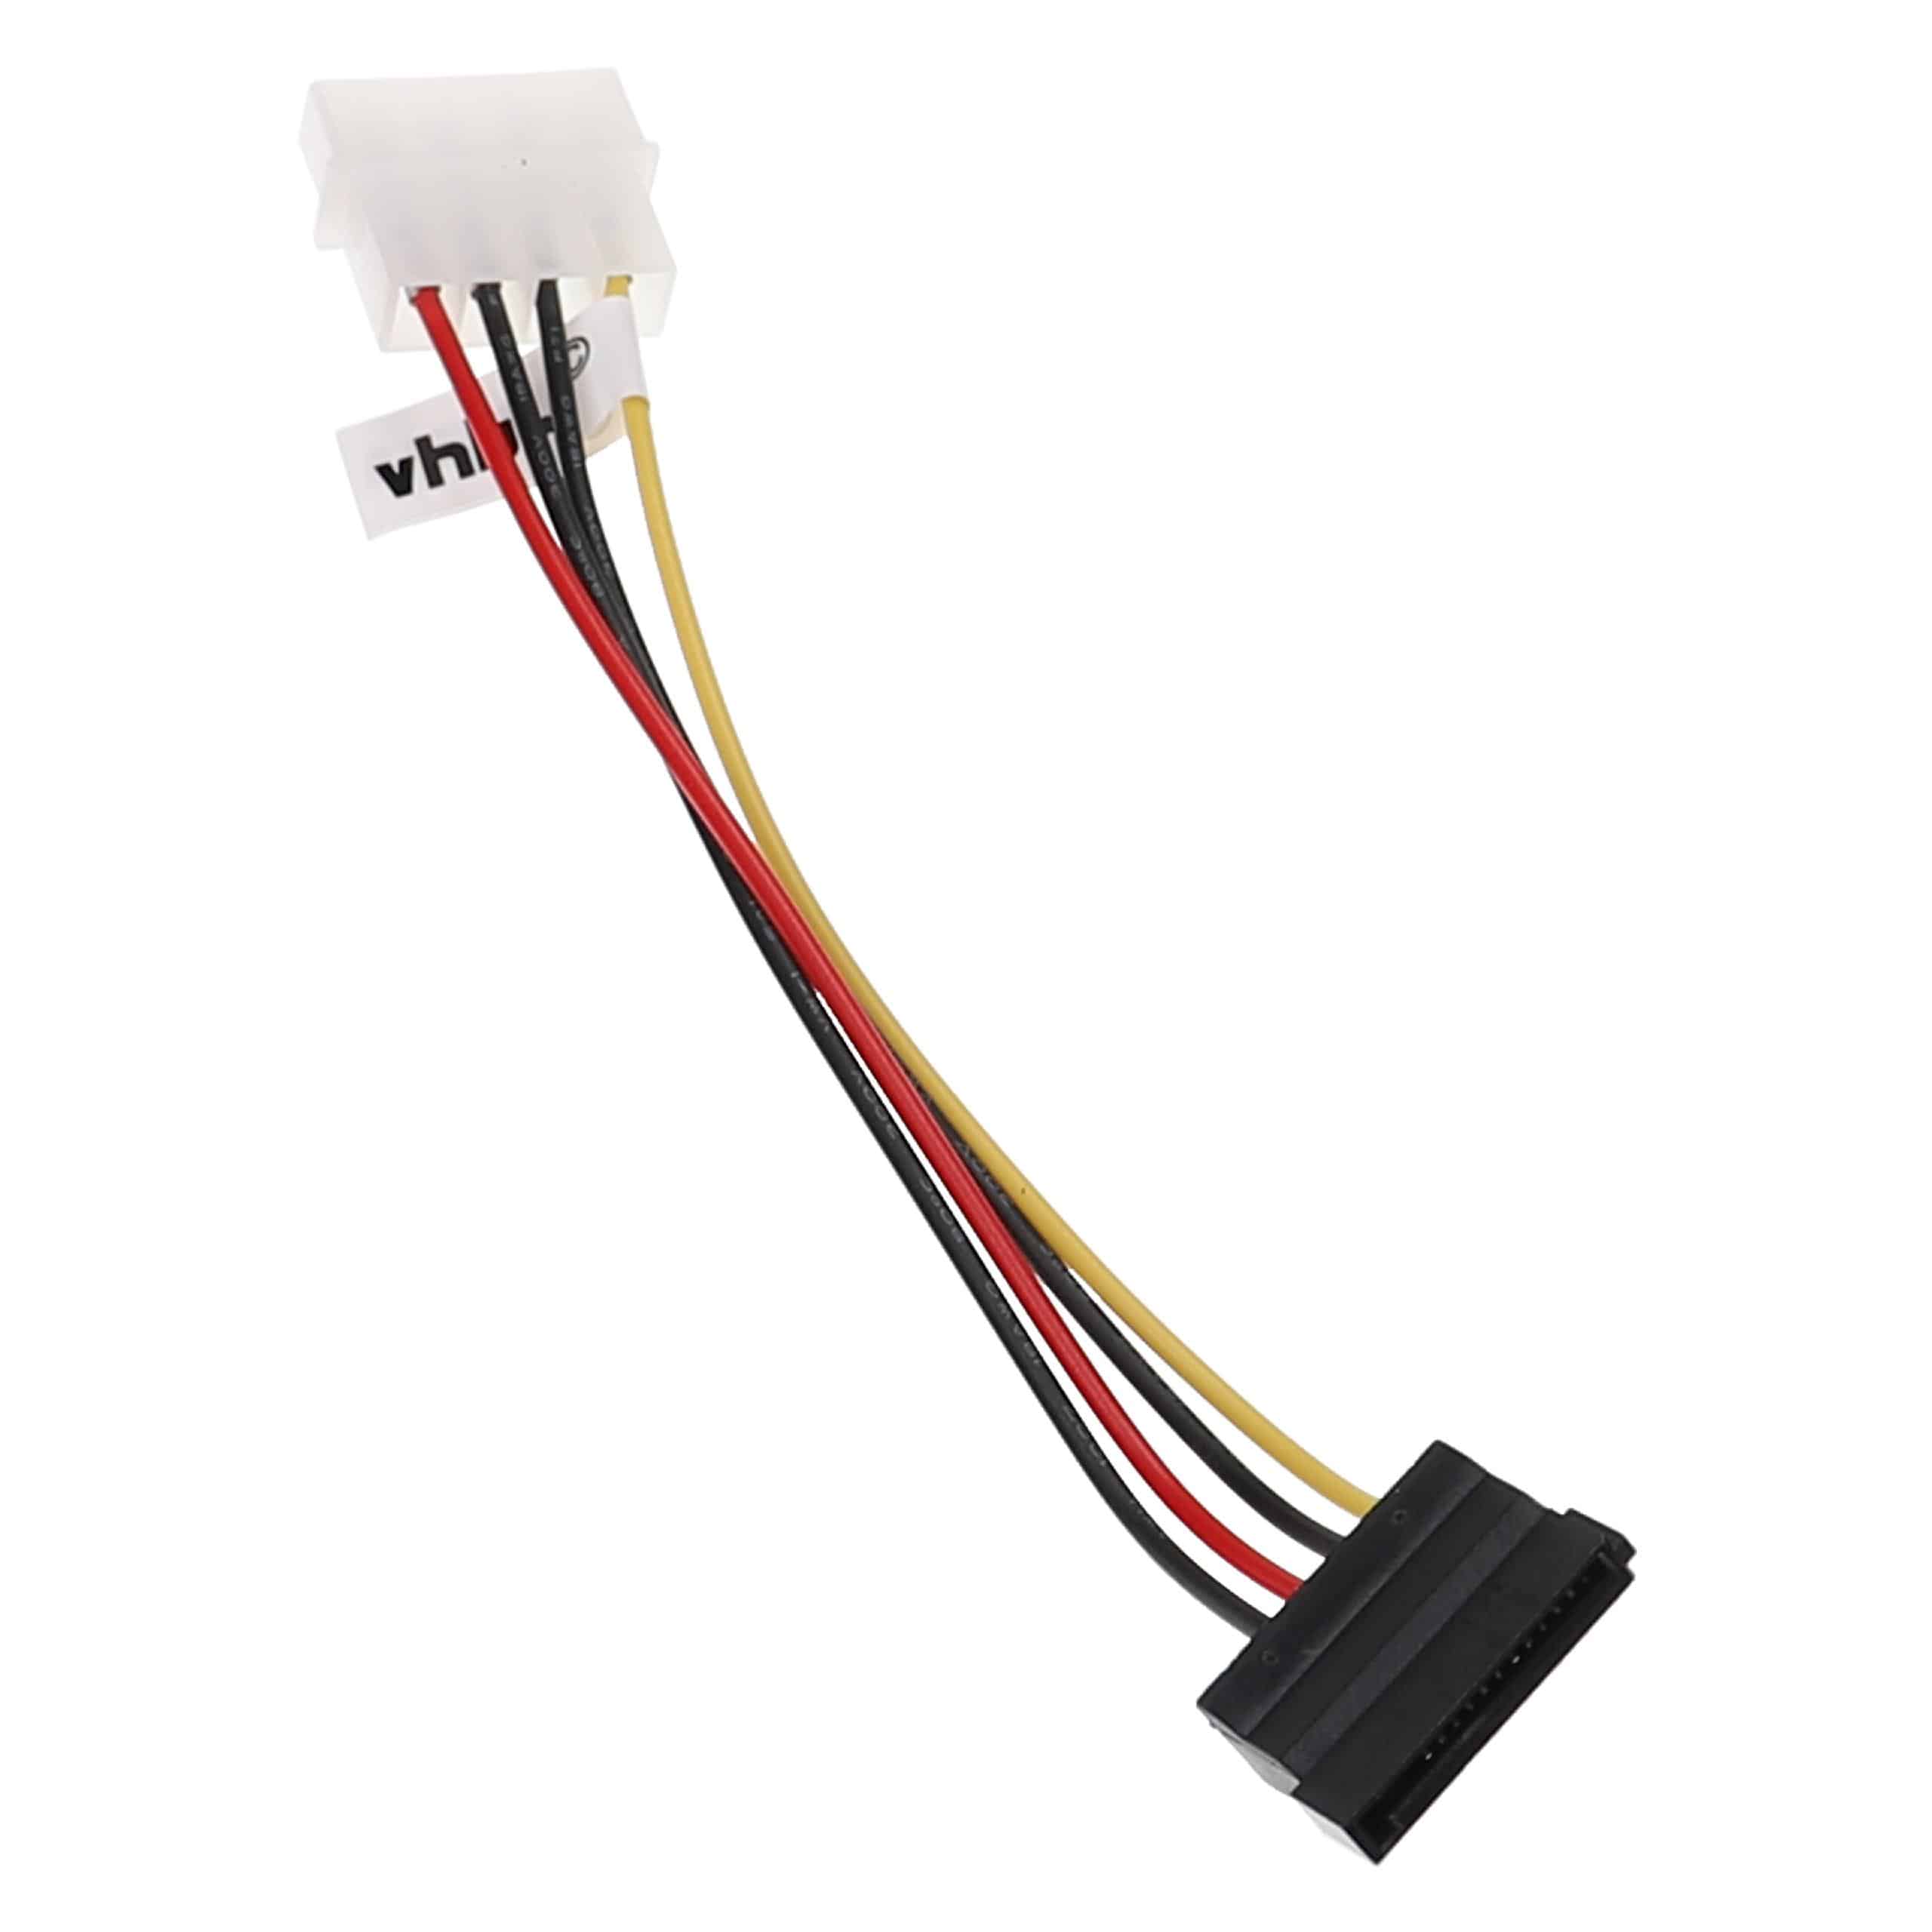 Power Cable to SATA socket suitable for Hard Drives - IDE Power Cable, 15 cm